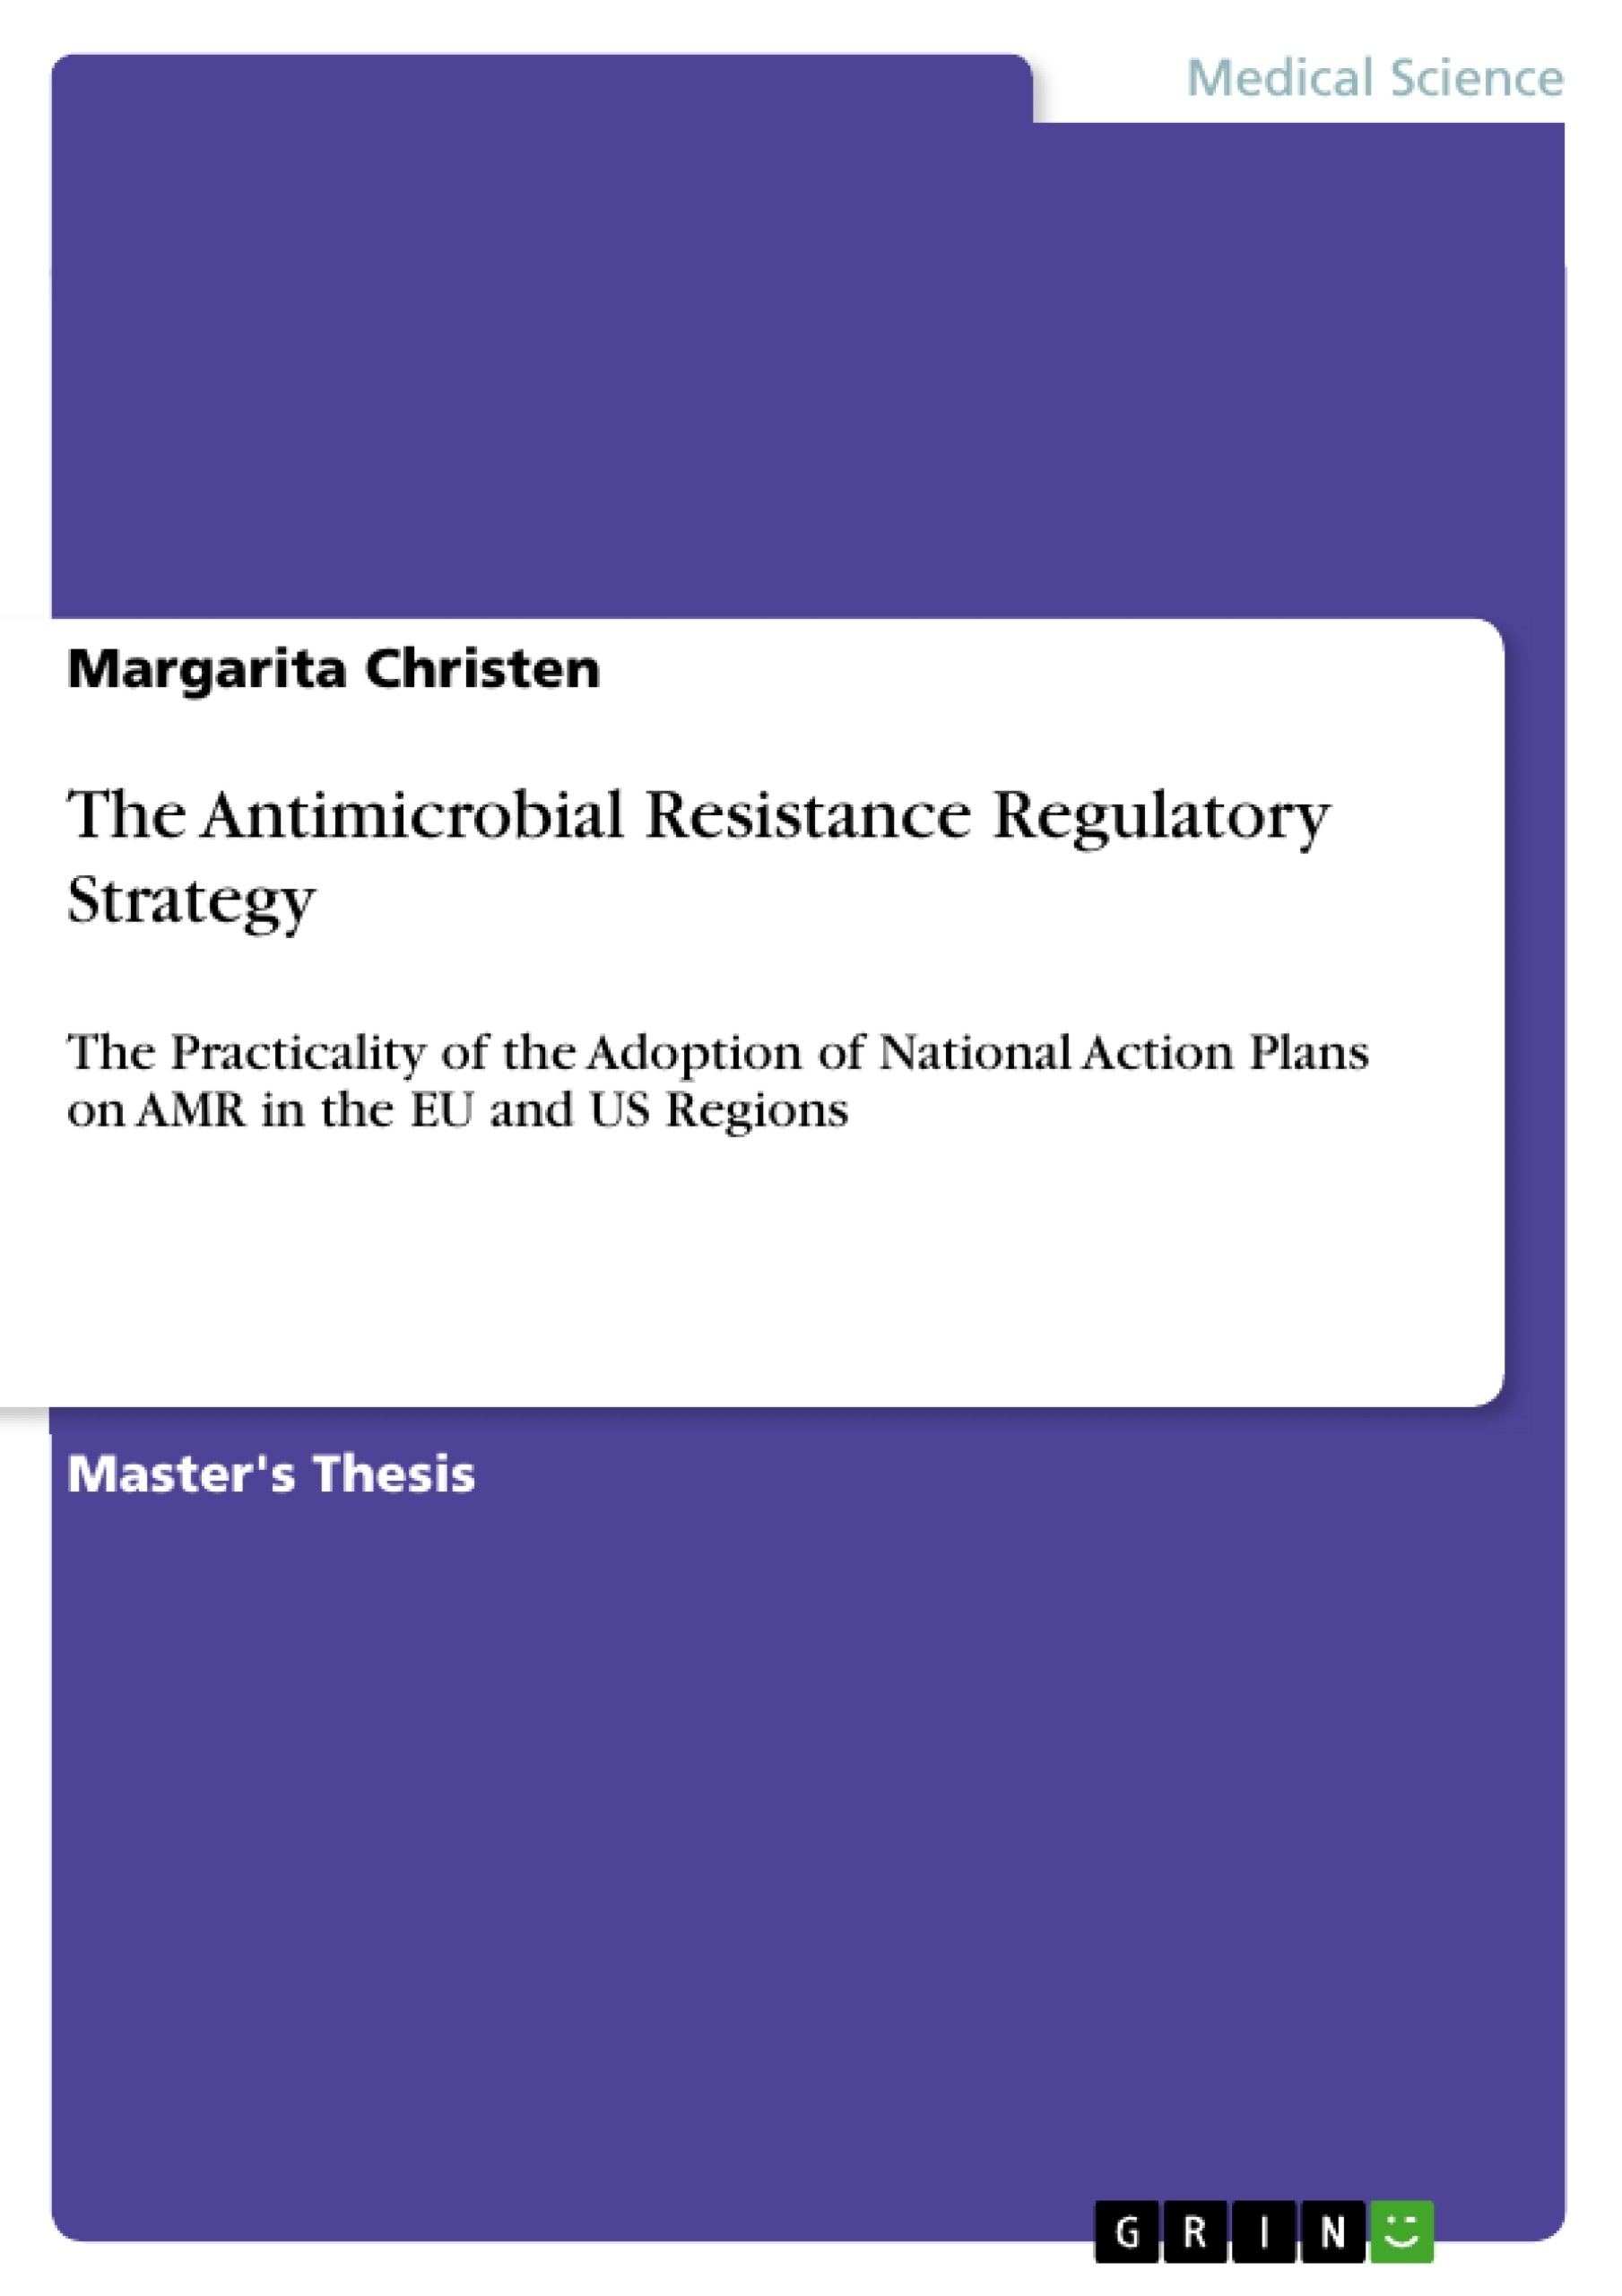 Title: The Antimicrobial Resistance Regulatory Strategy